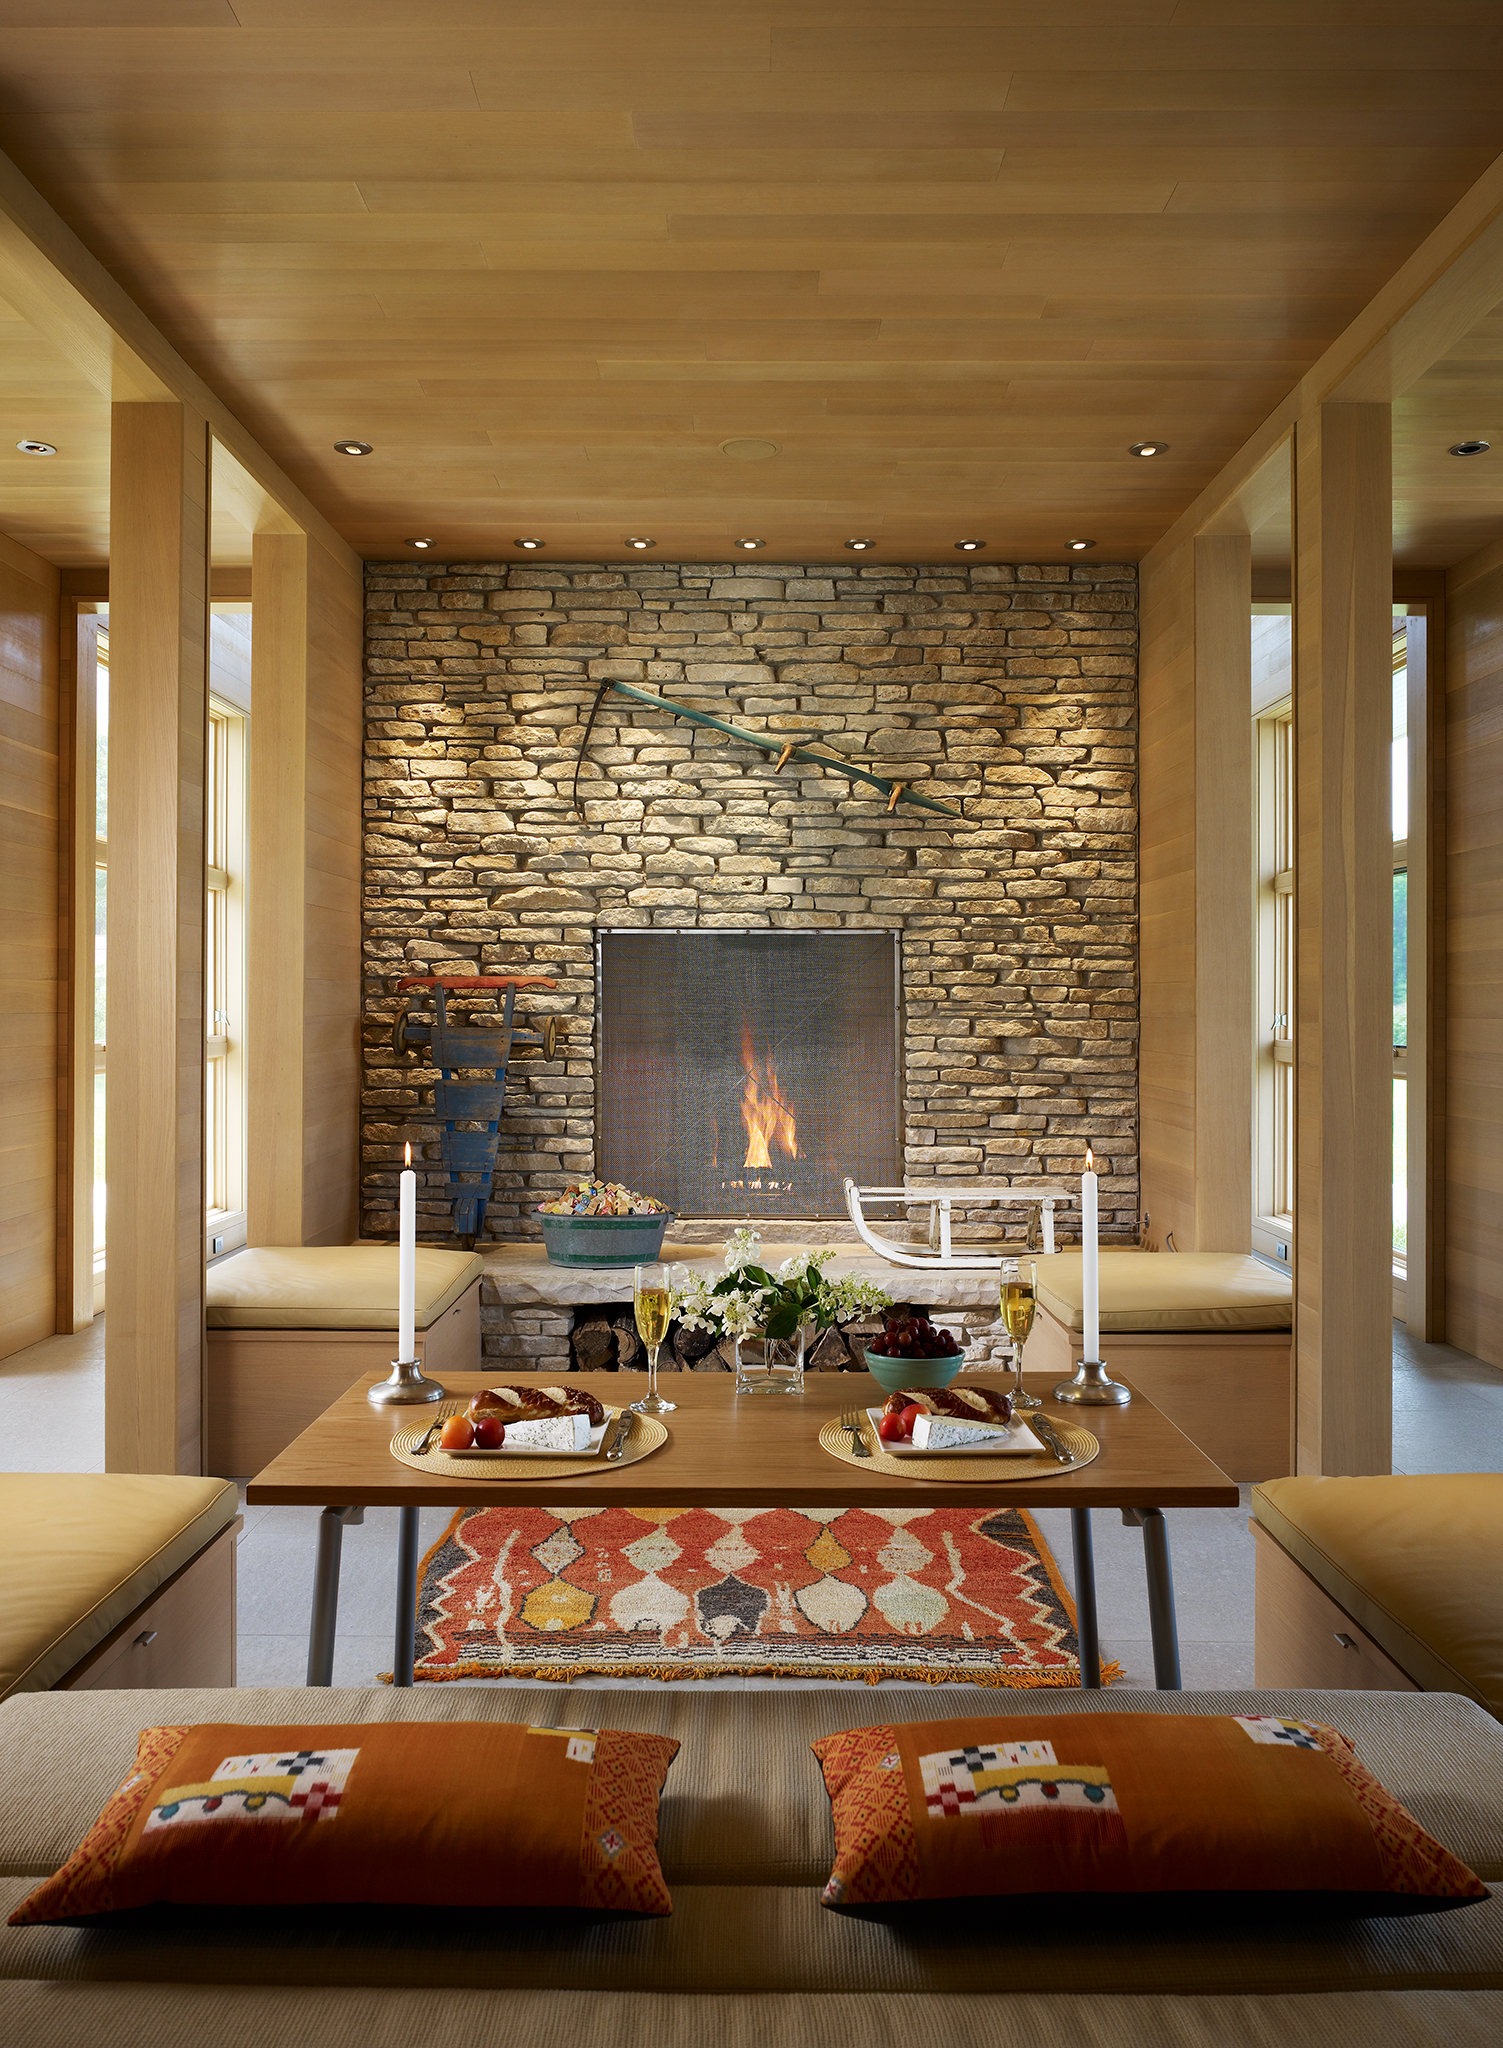  MI Residence  Architectural Digest + Tigerman McCurry  Michigan      Return to Projects  